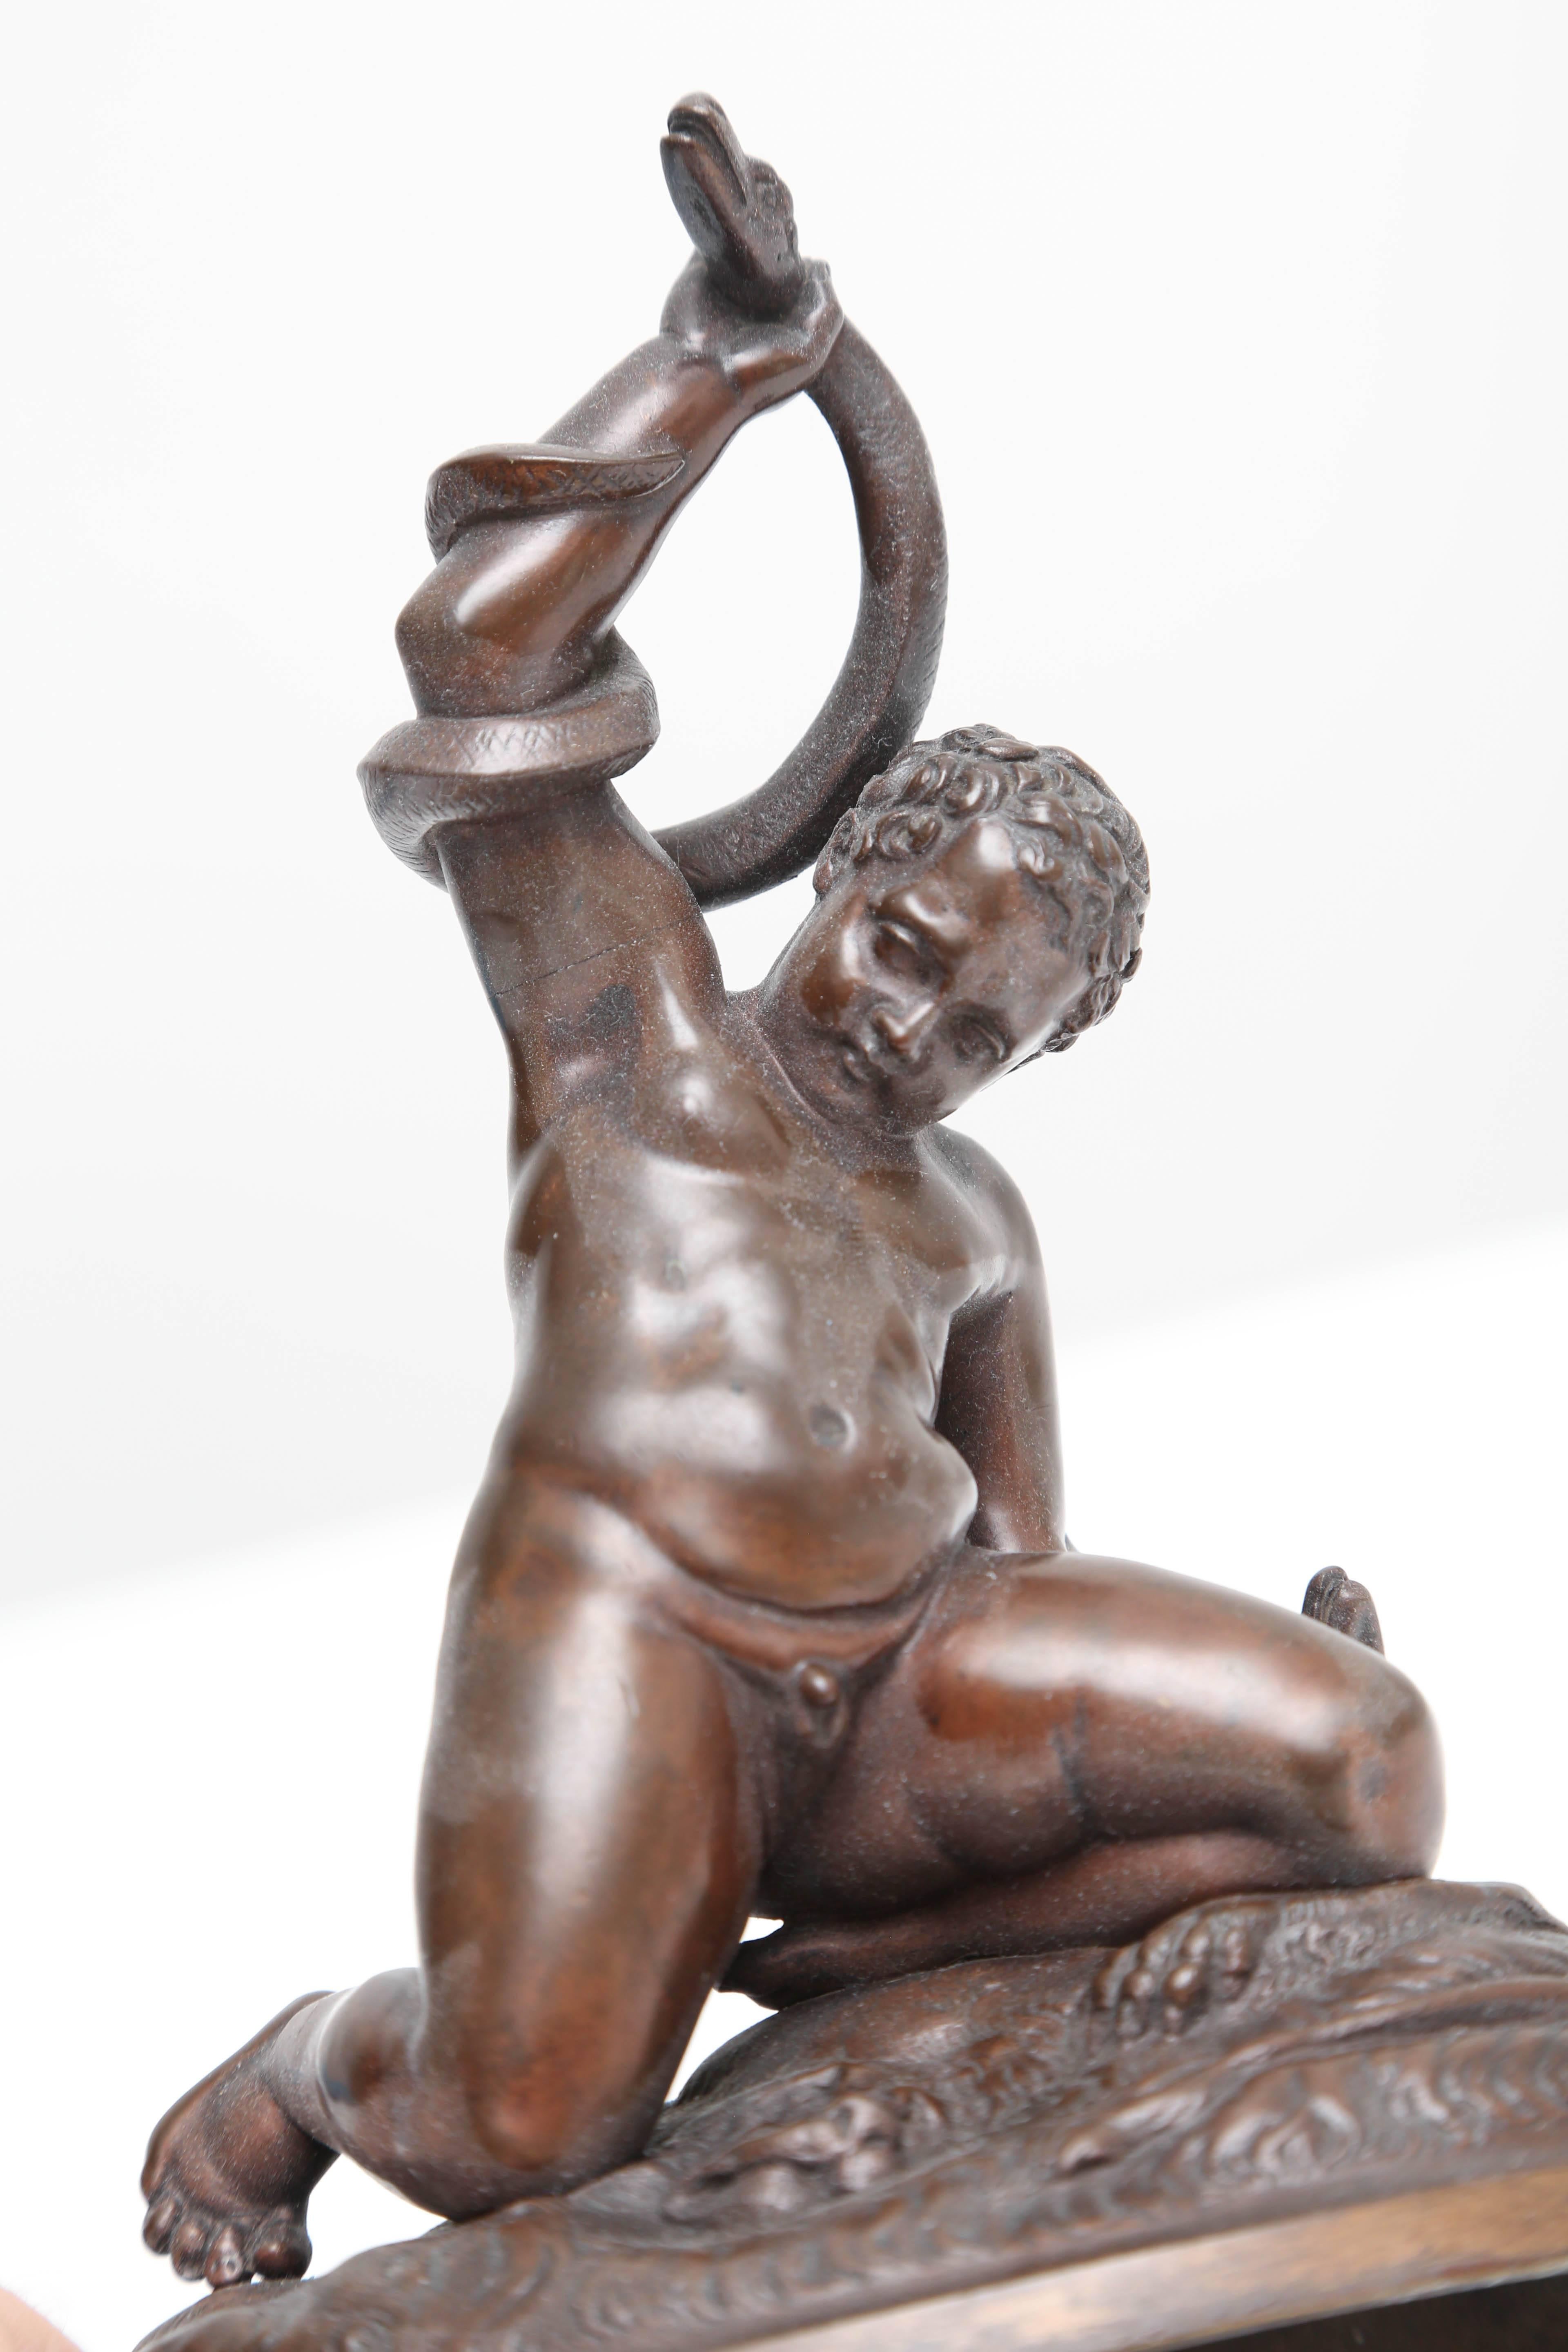 Cast Bronze of the Young Hercules Wrestling with Serpents, Italy, 18th Century